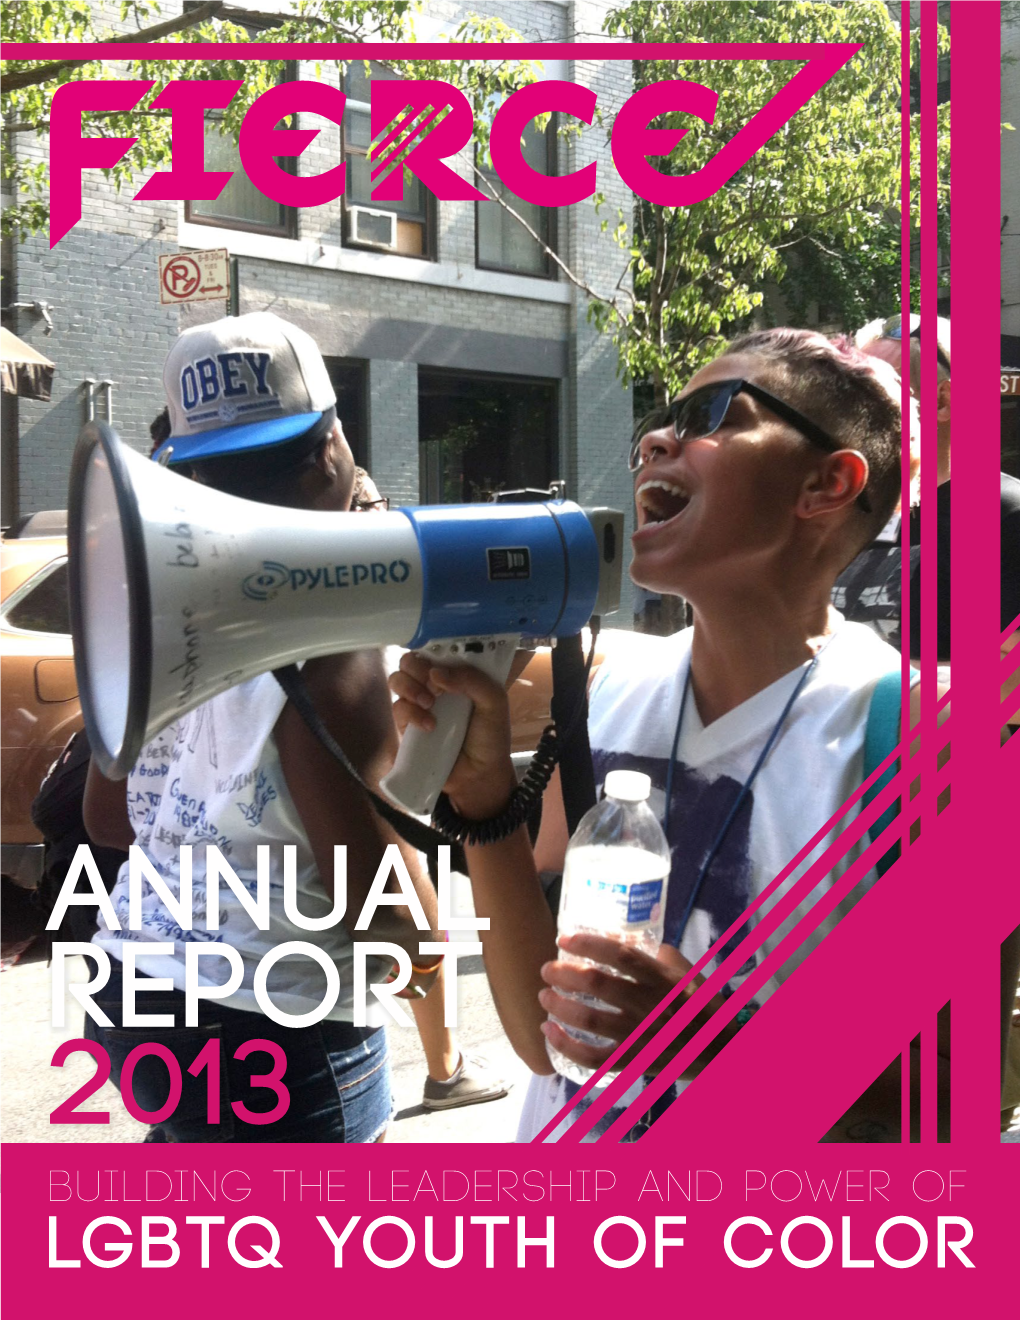 Lgbtq Youth of Color Annual Report 2013 1 Fierce Mission and History